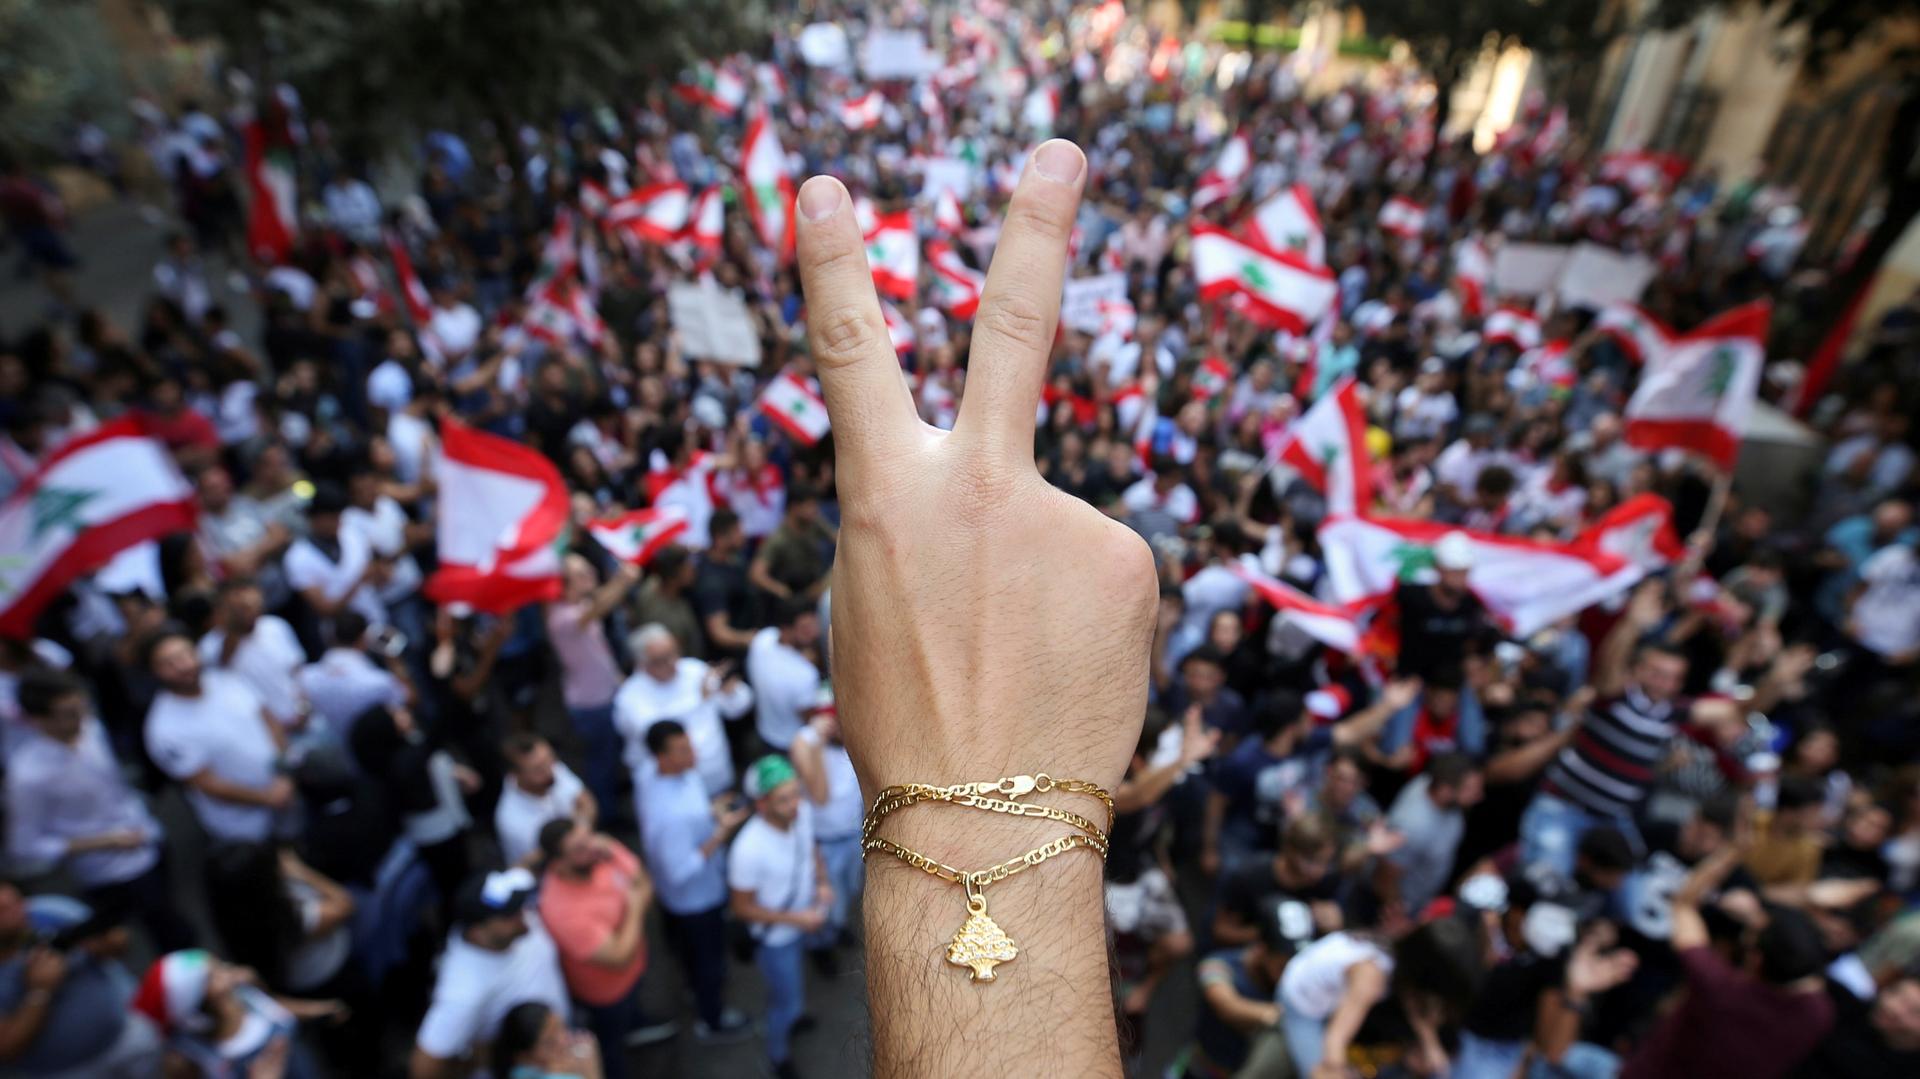 A demonstrator flashes a V sign during an anti-government protest in downtown Beirut, Lebanon October 21, 2019. 